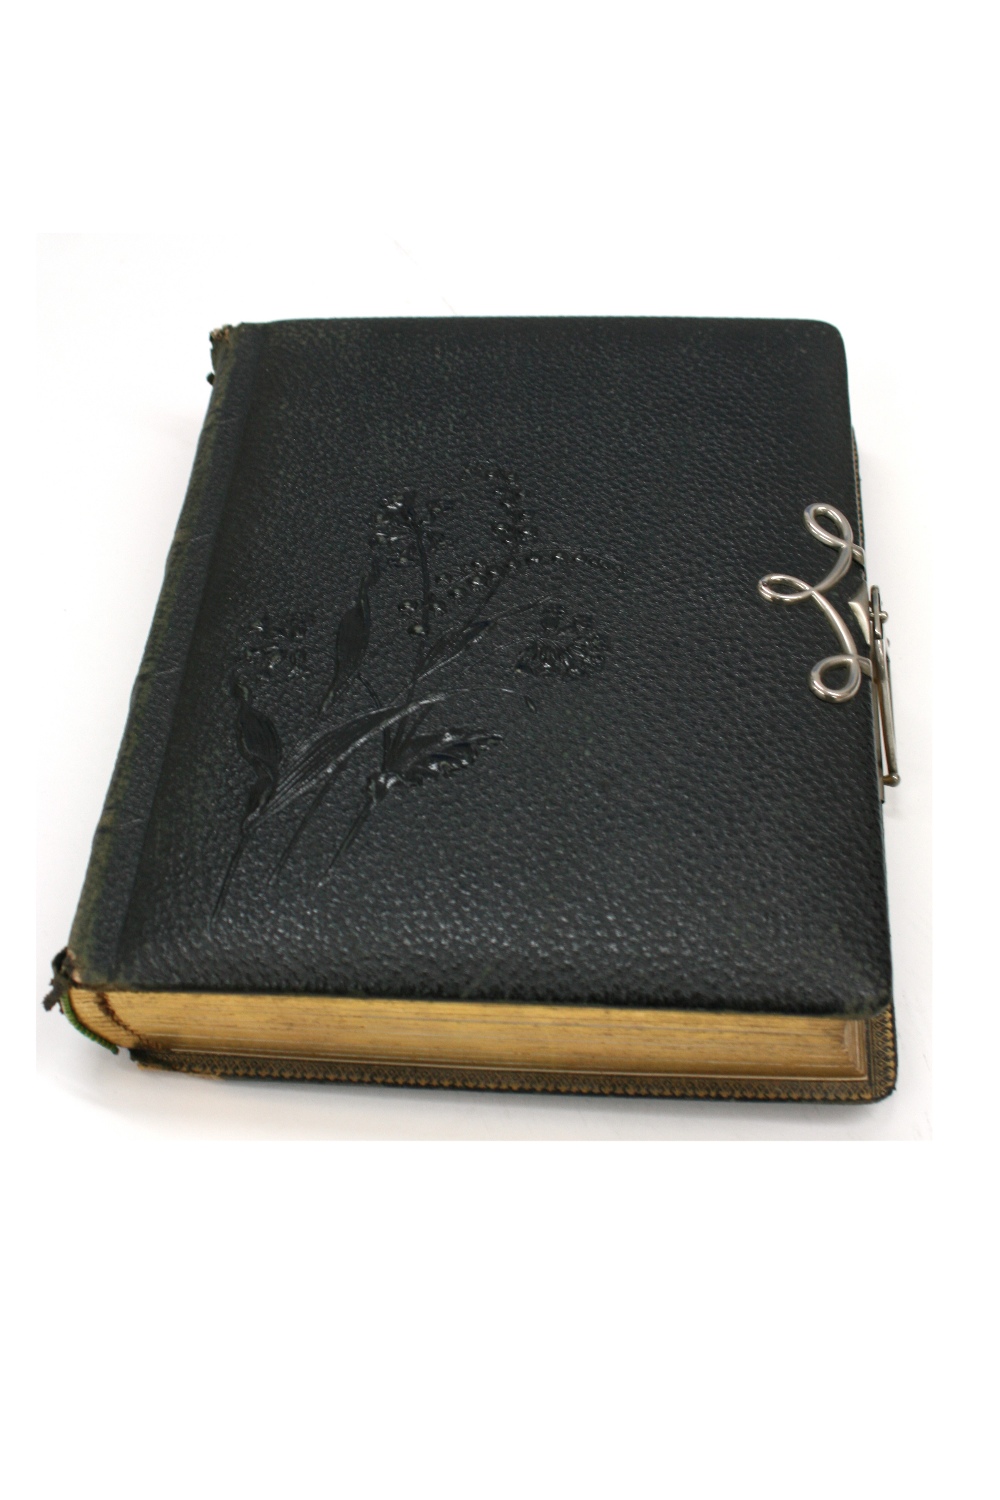 A Victorian black leather Favourites of